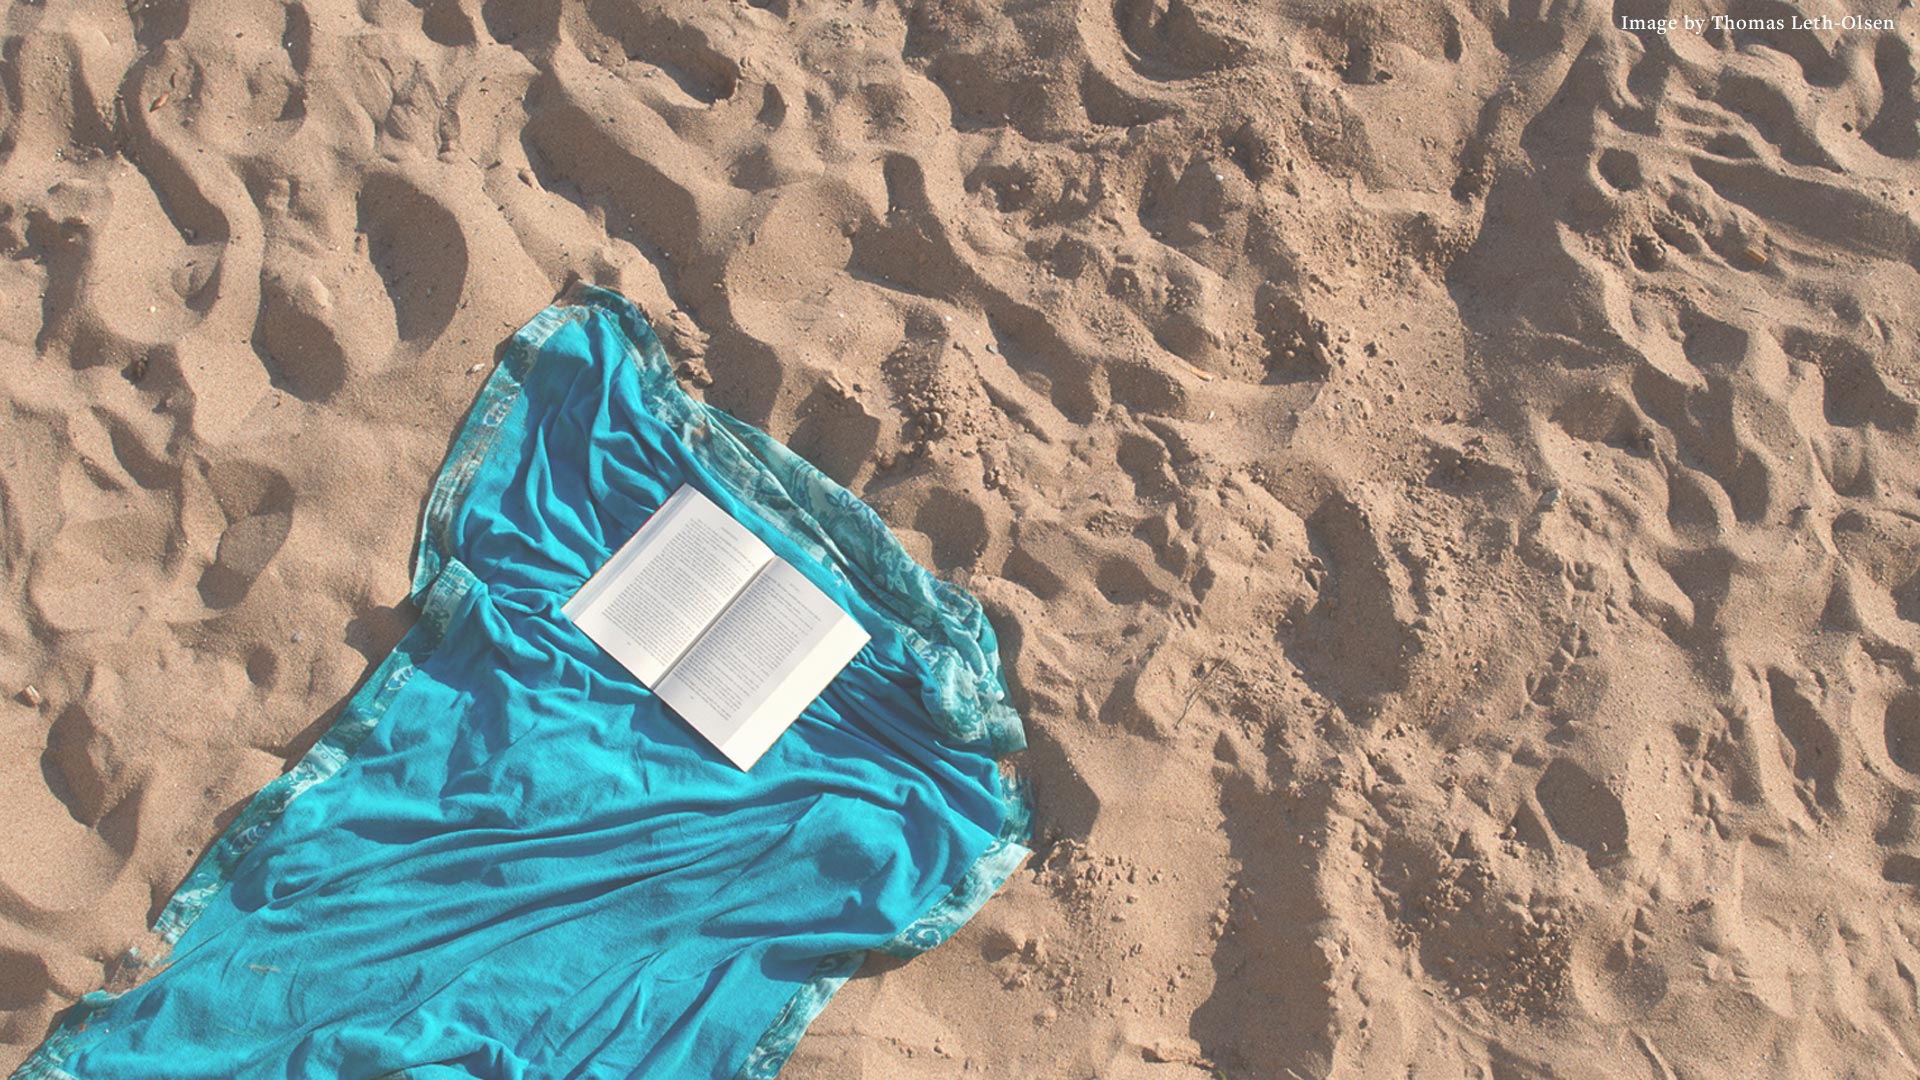 Open book on the sand